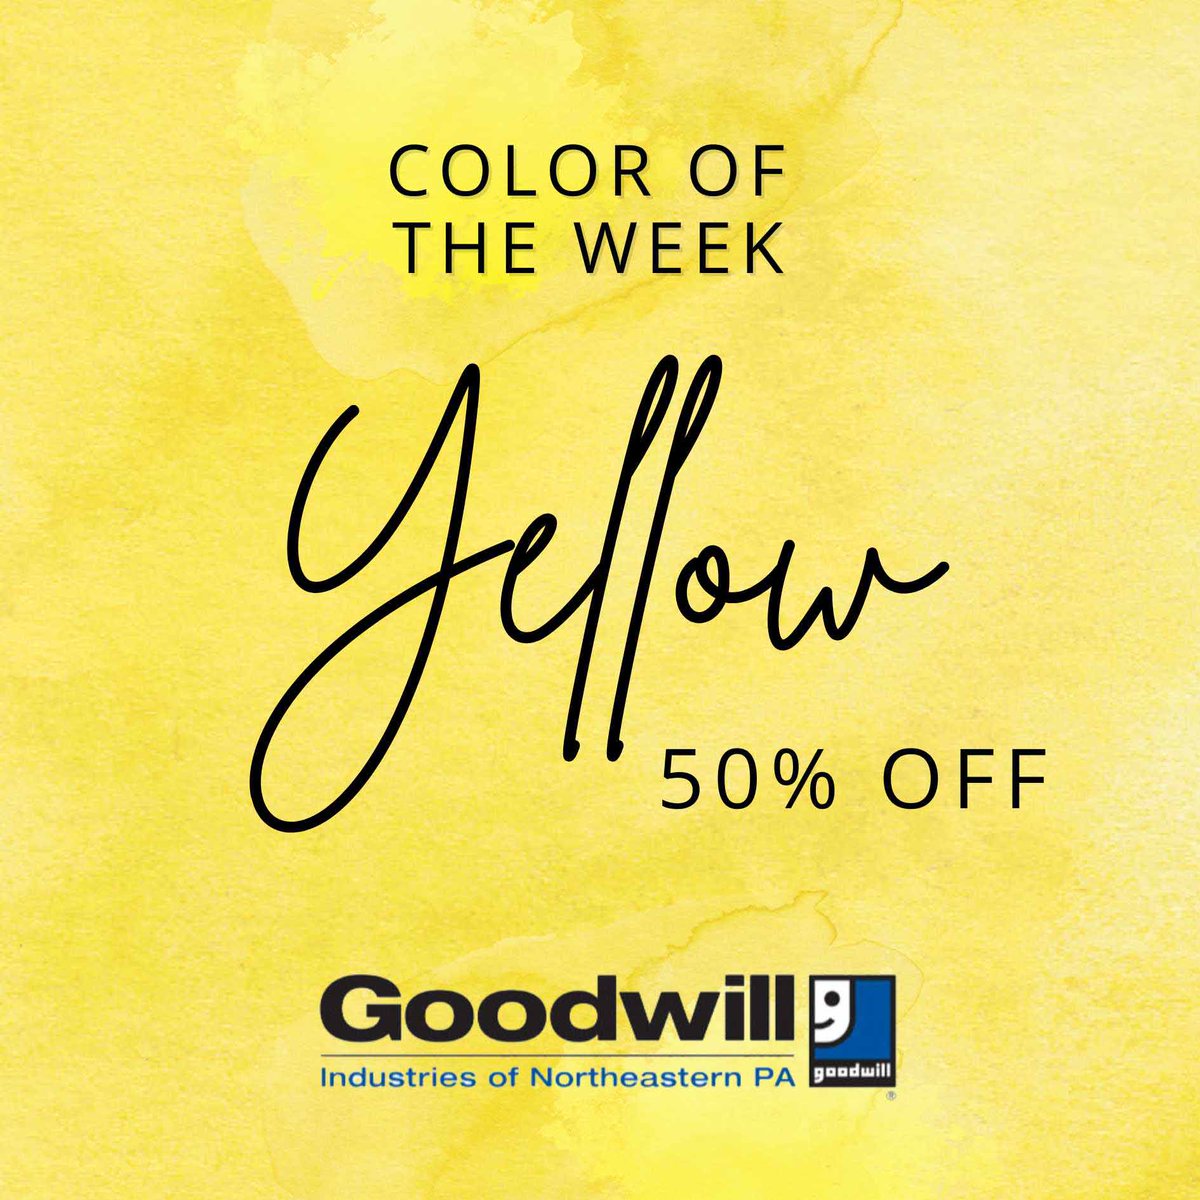 This week's 50% off color of the week is
🟨YELLOW🟨
#HappyThrifting #GoodwillofNEPA